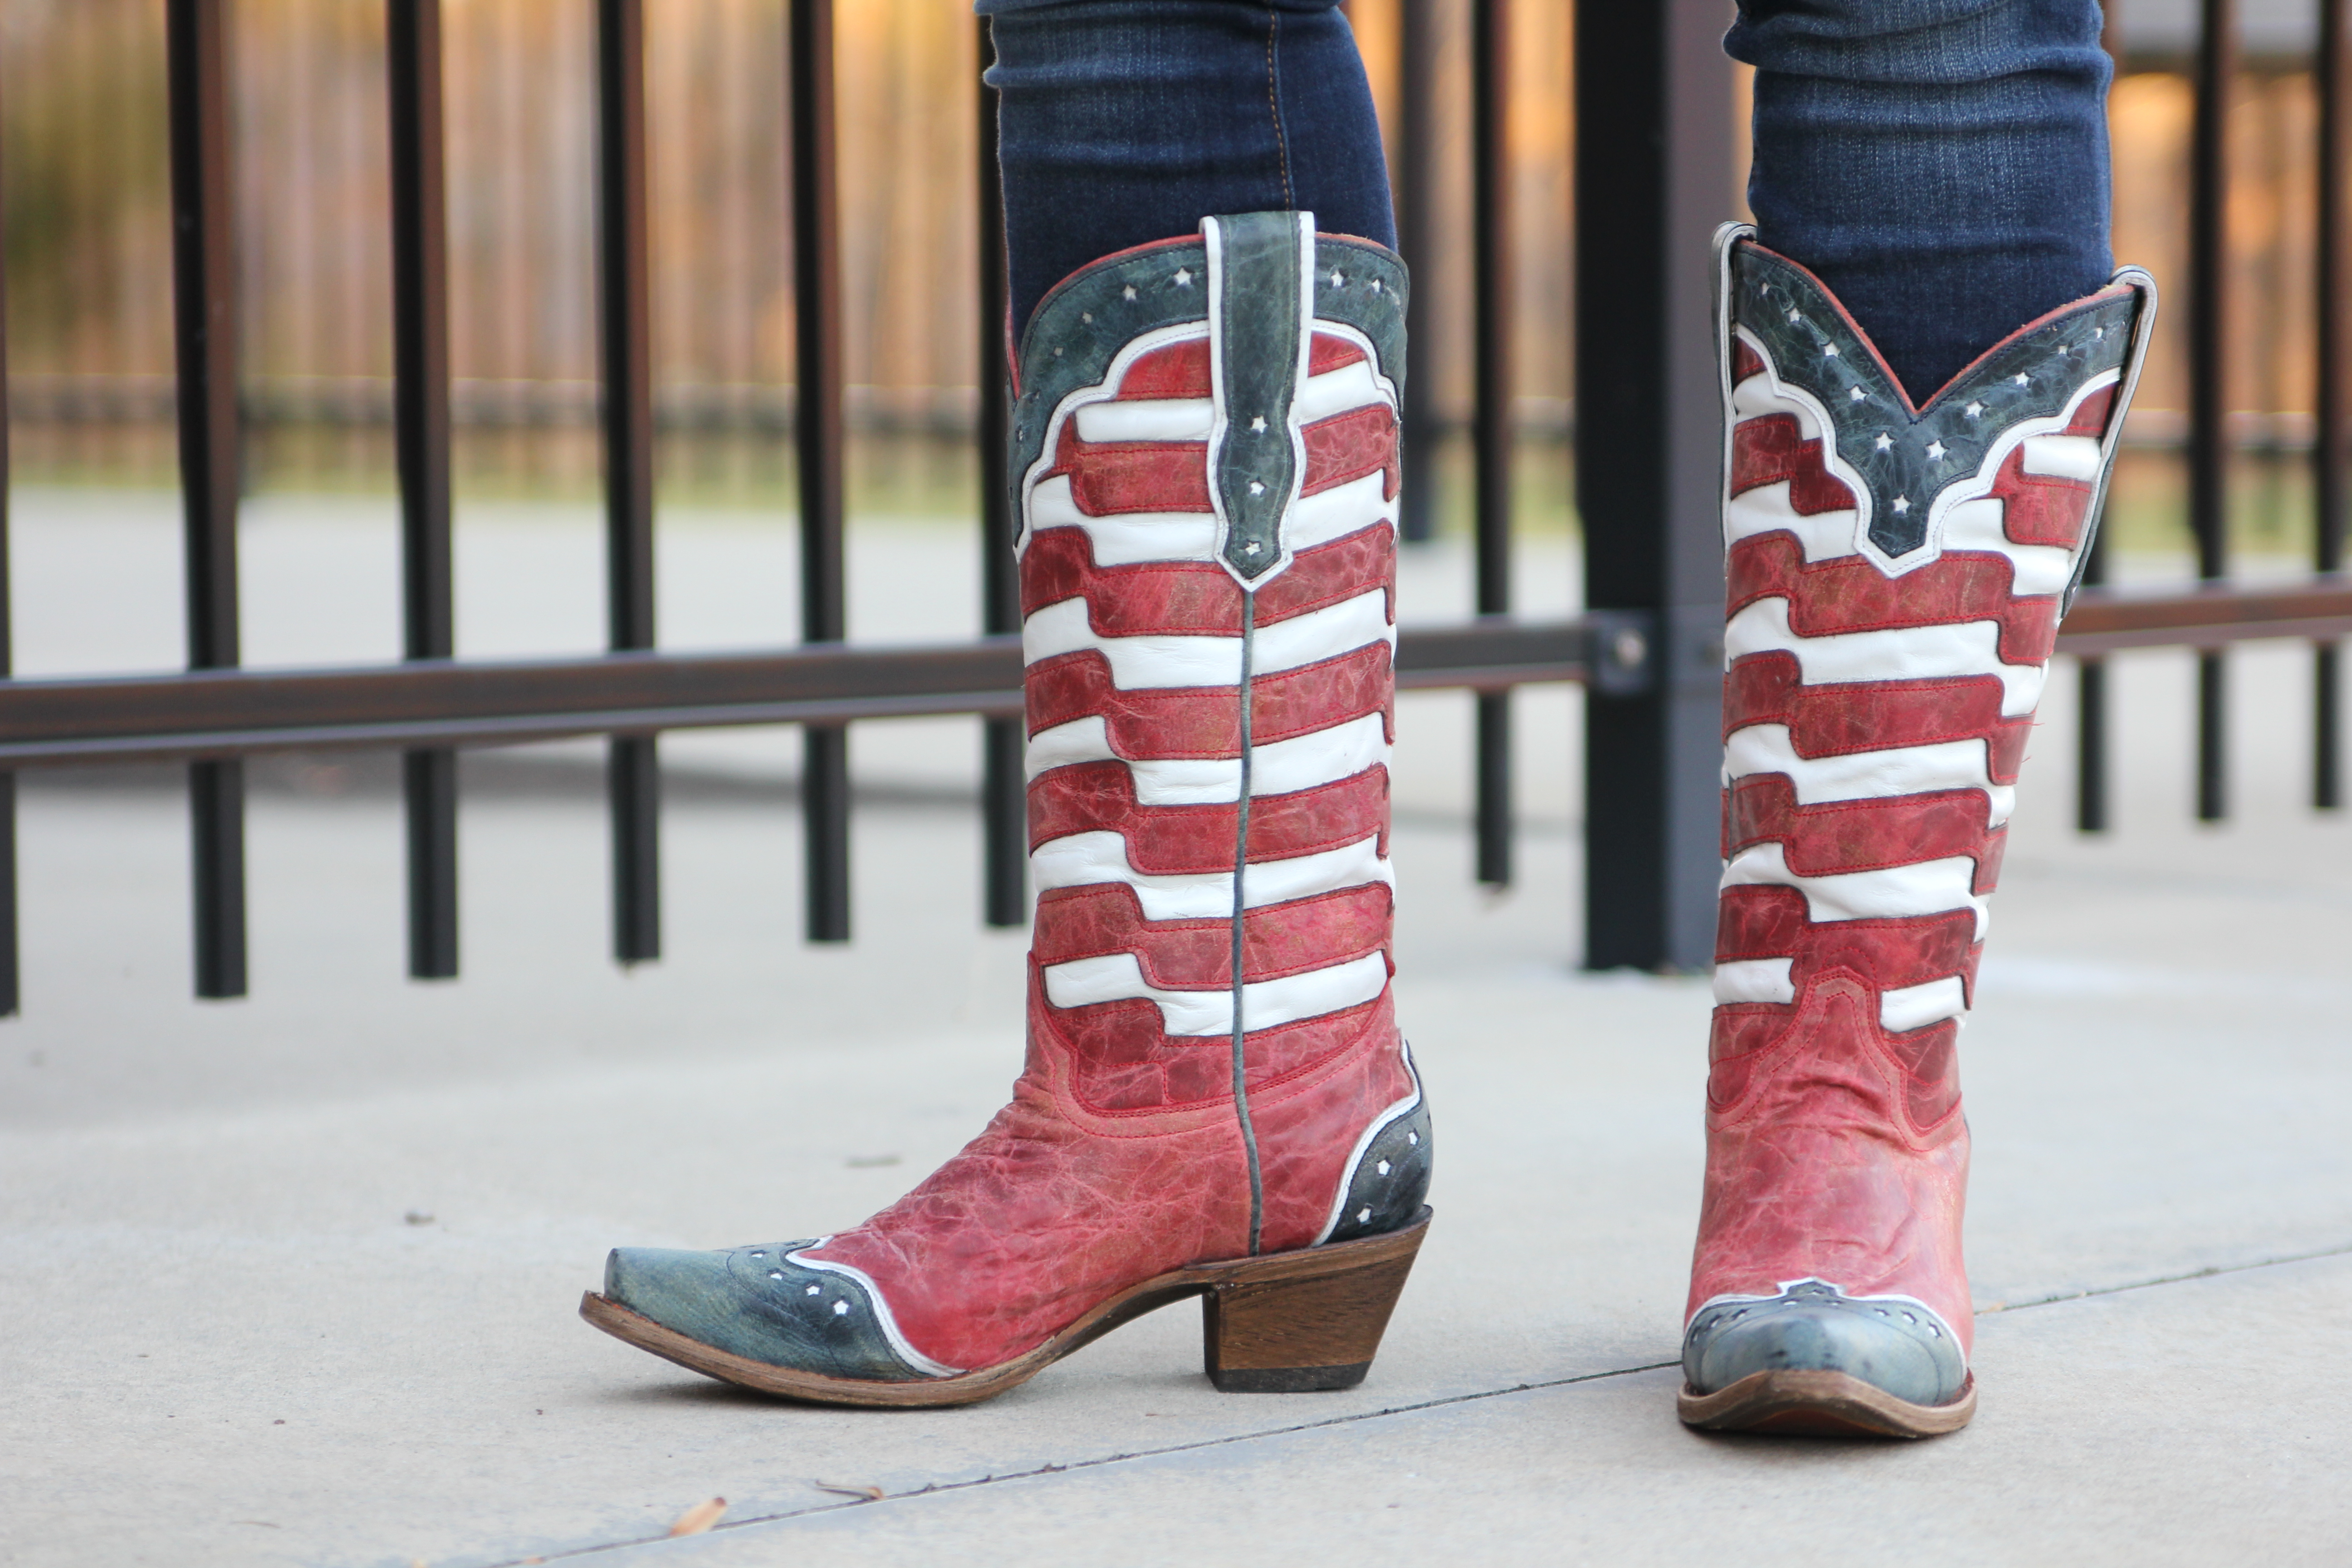 white and blue cowboy boots